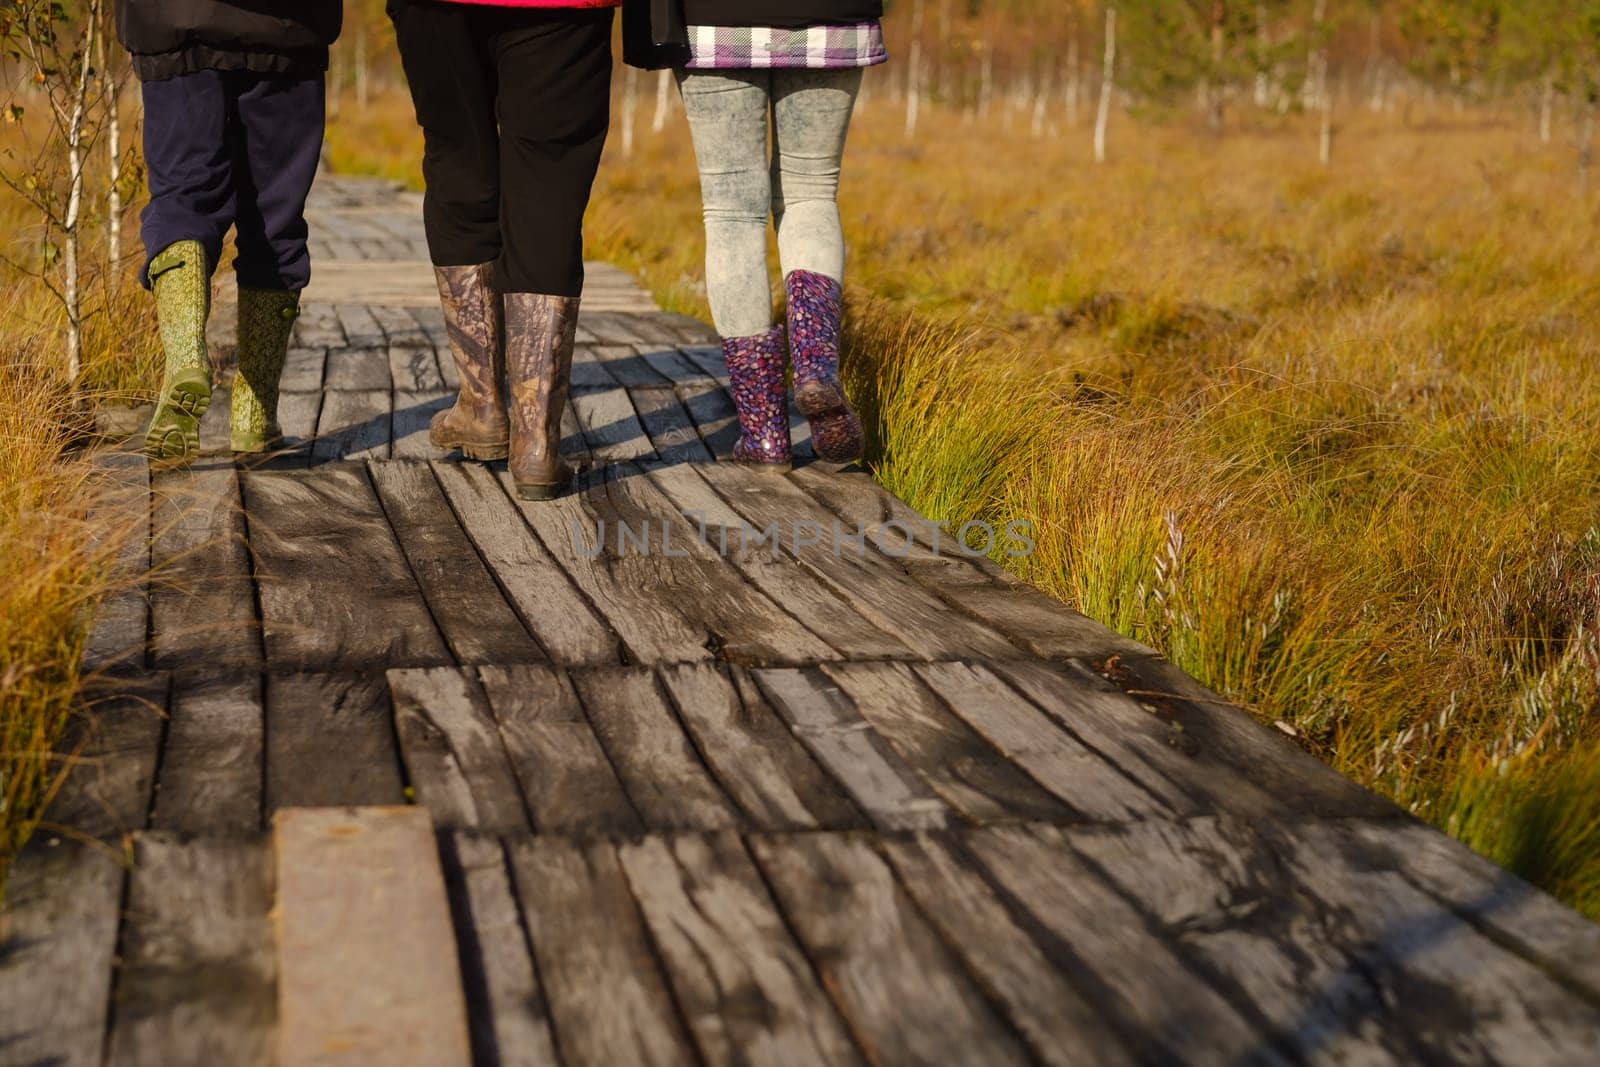 People in boots walk along a wooden path in a swamp in Yelnya, Belarus by Lobachad